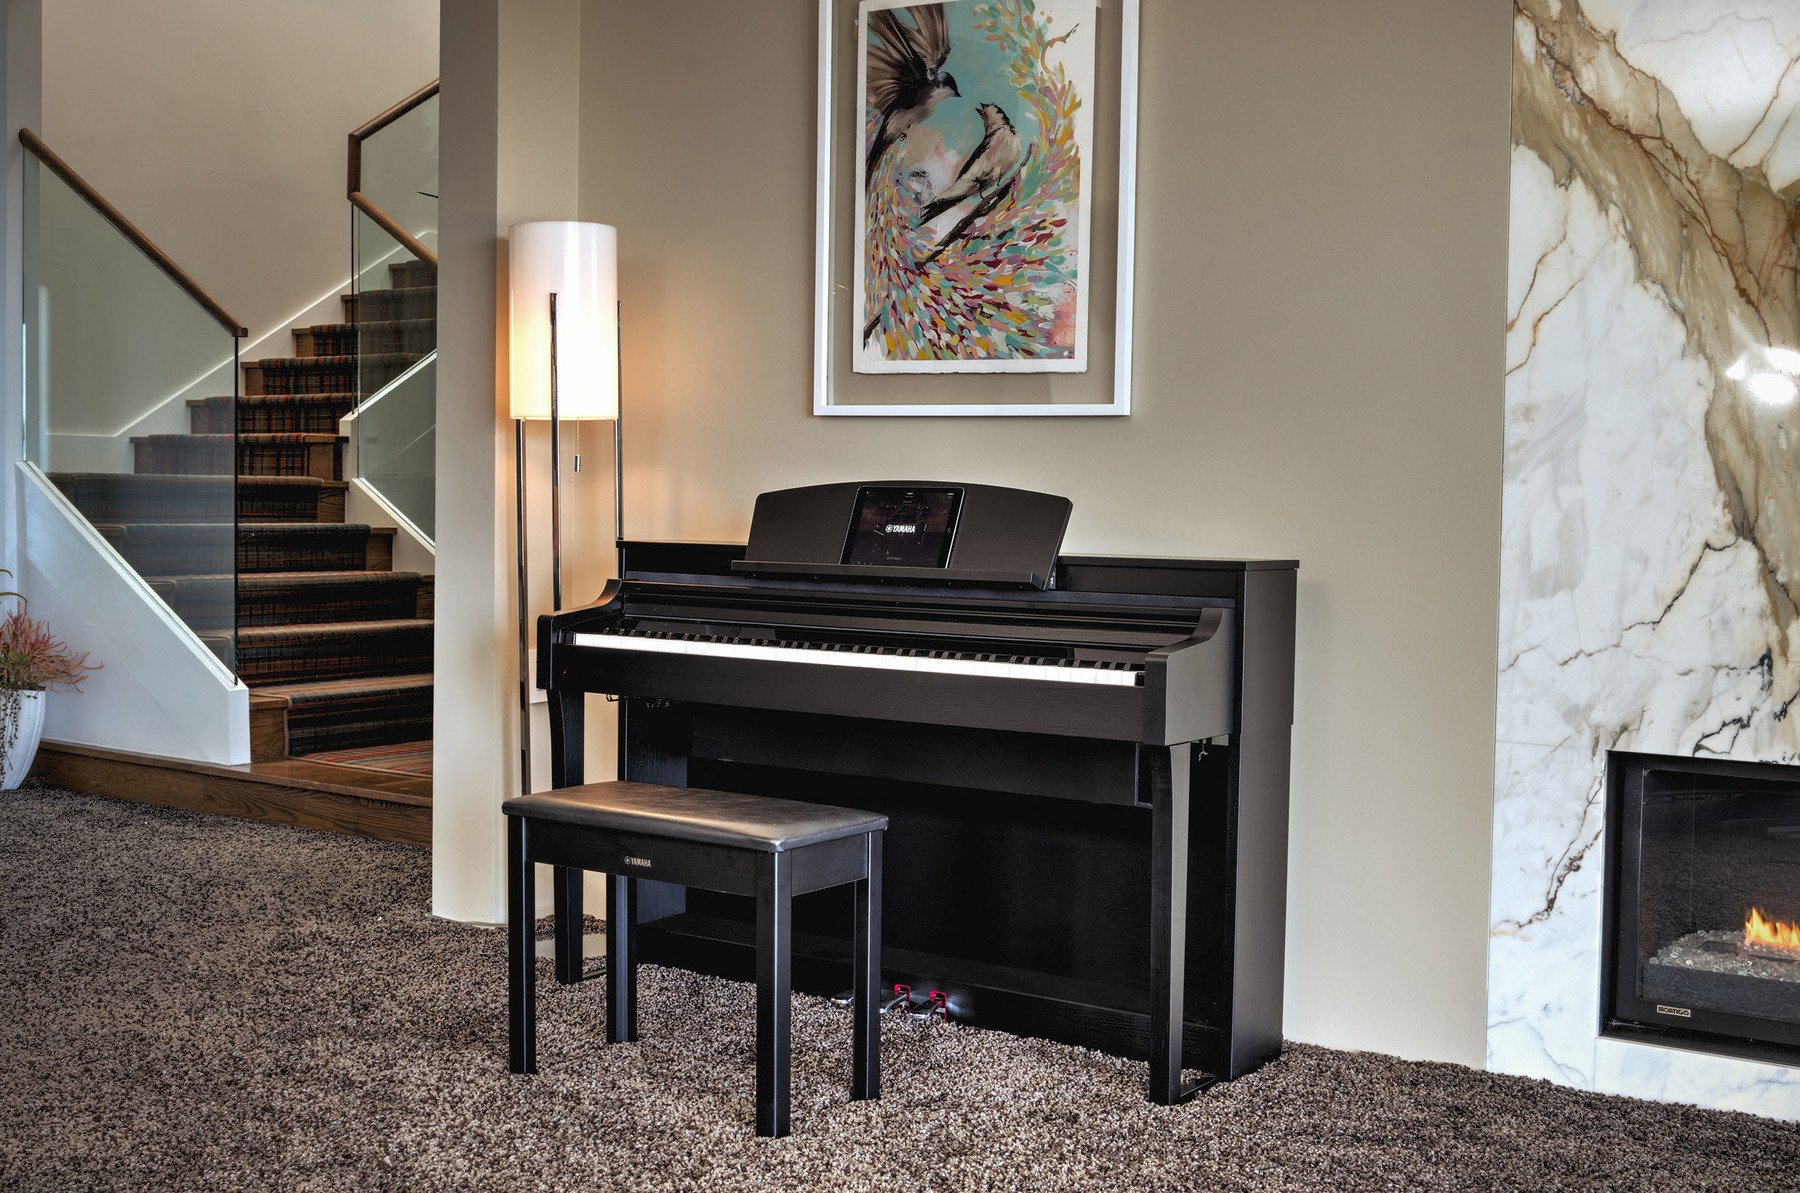 How to choose a digital piano